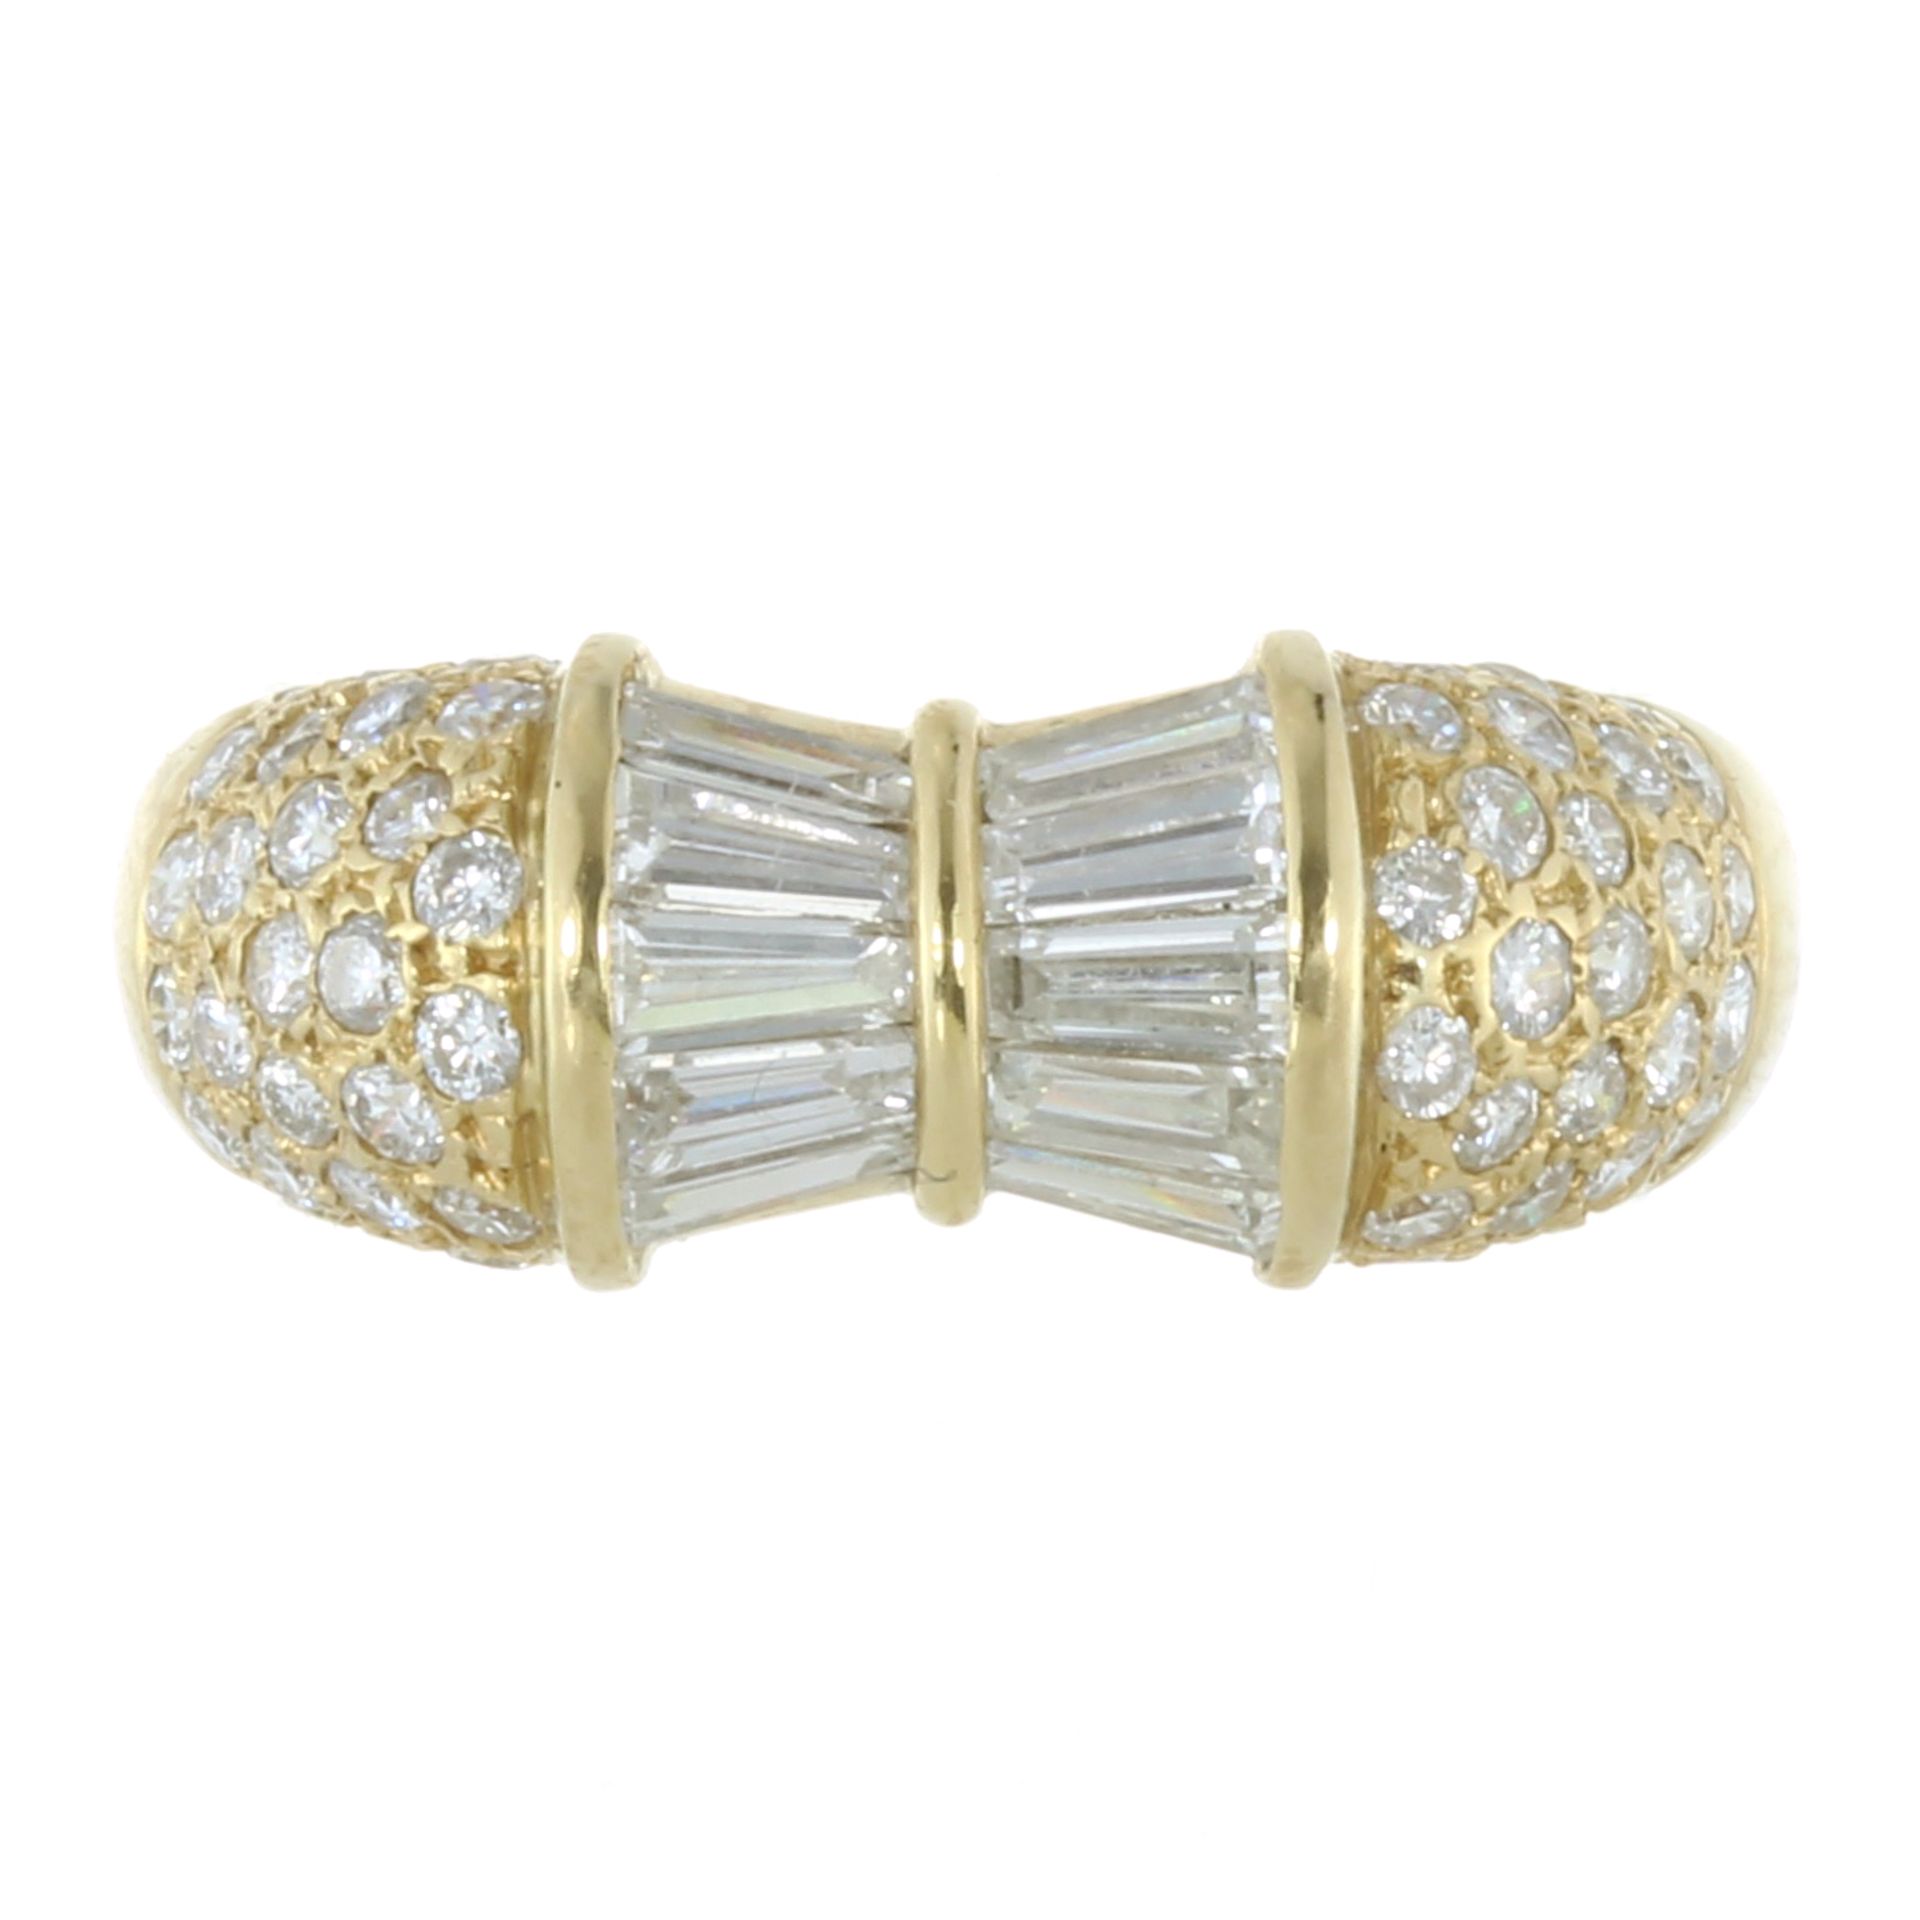 A DIAMOND DRESS RING in 18ct yellow gold, the bow-style central motif jewelled with calibre cut